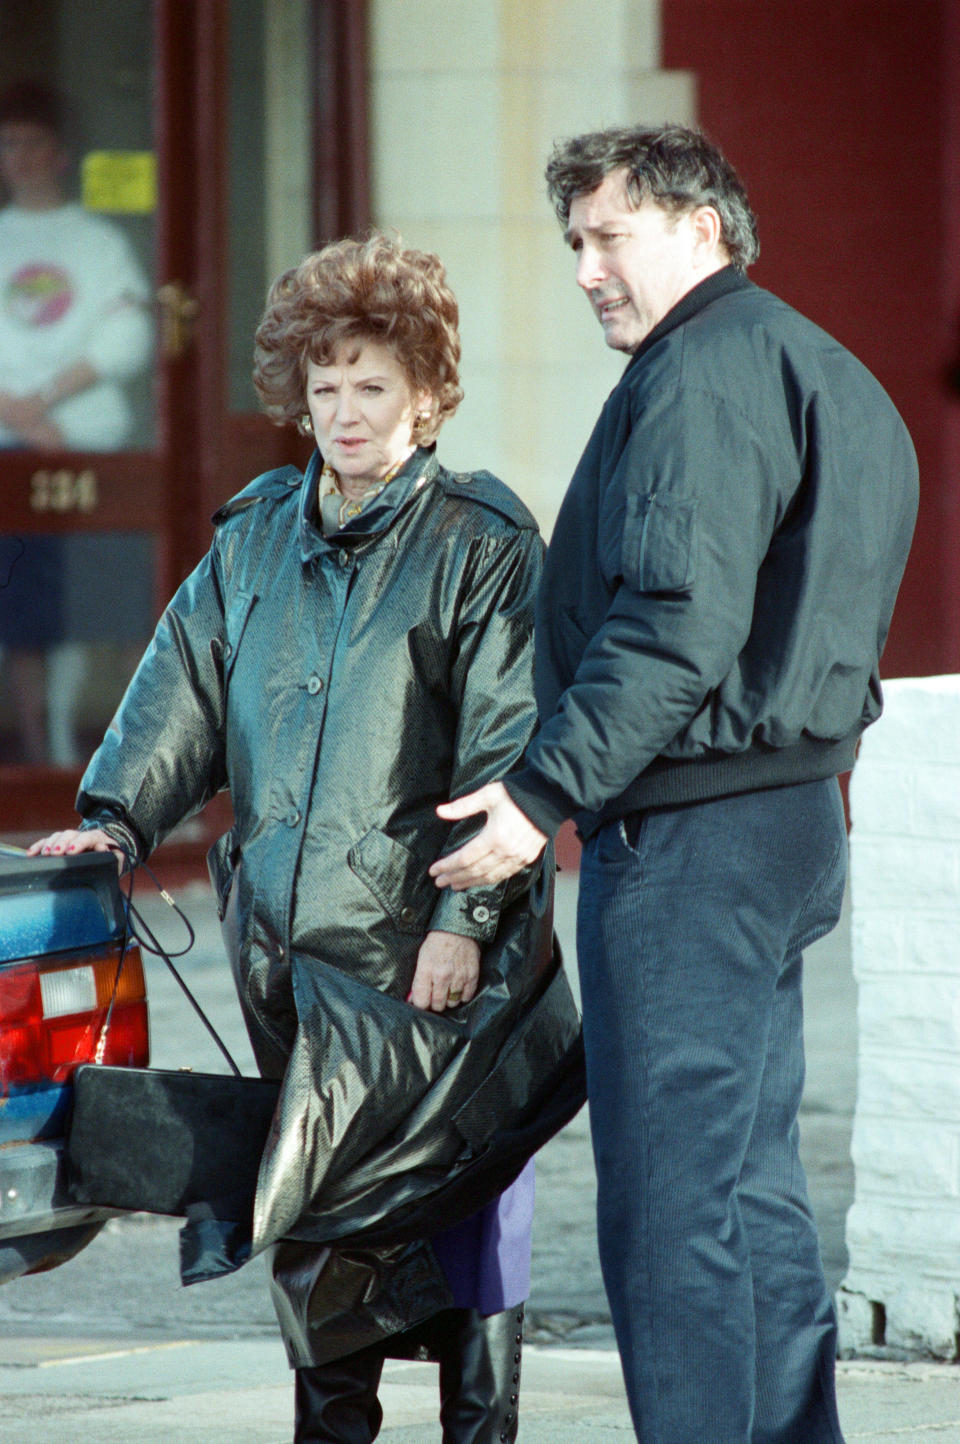 The cast of 'Coronation Street' filming scenes for death of Alan Bradley storyline in Blackpool. Barbara Knox and Mark Eden as Rita Fairclough and Alan Bradley. 30th October 1989. (Photo by Andrew Stenning/Mirrorpix/Getty Images)